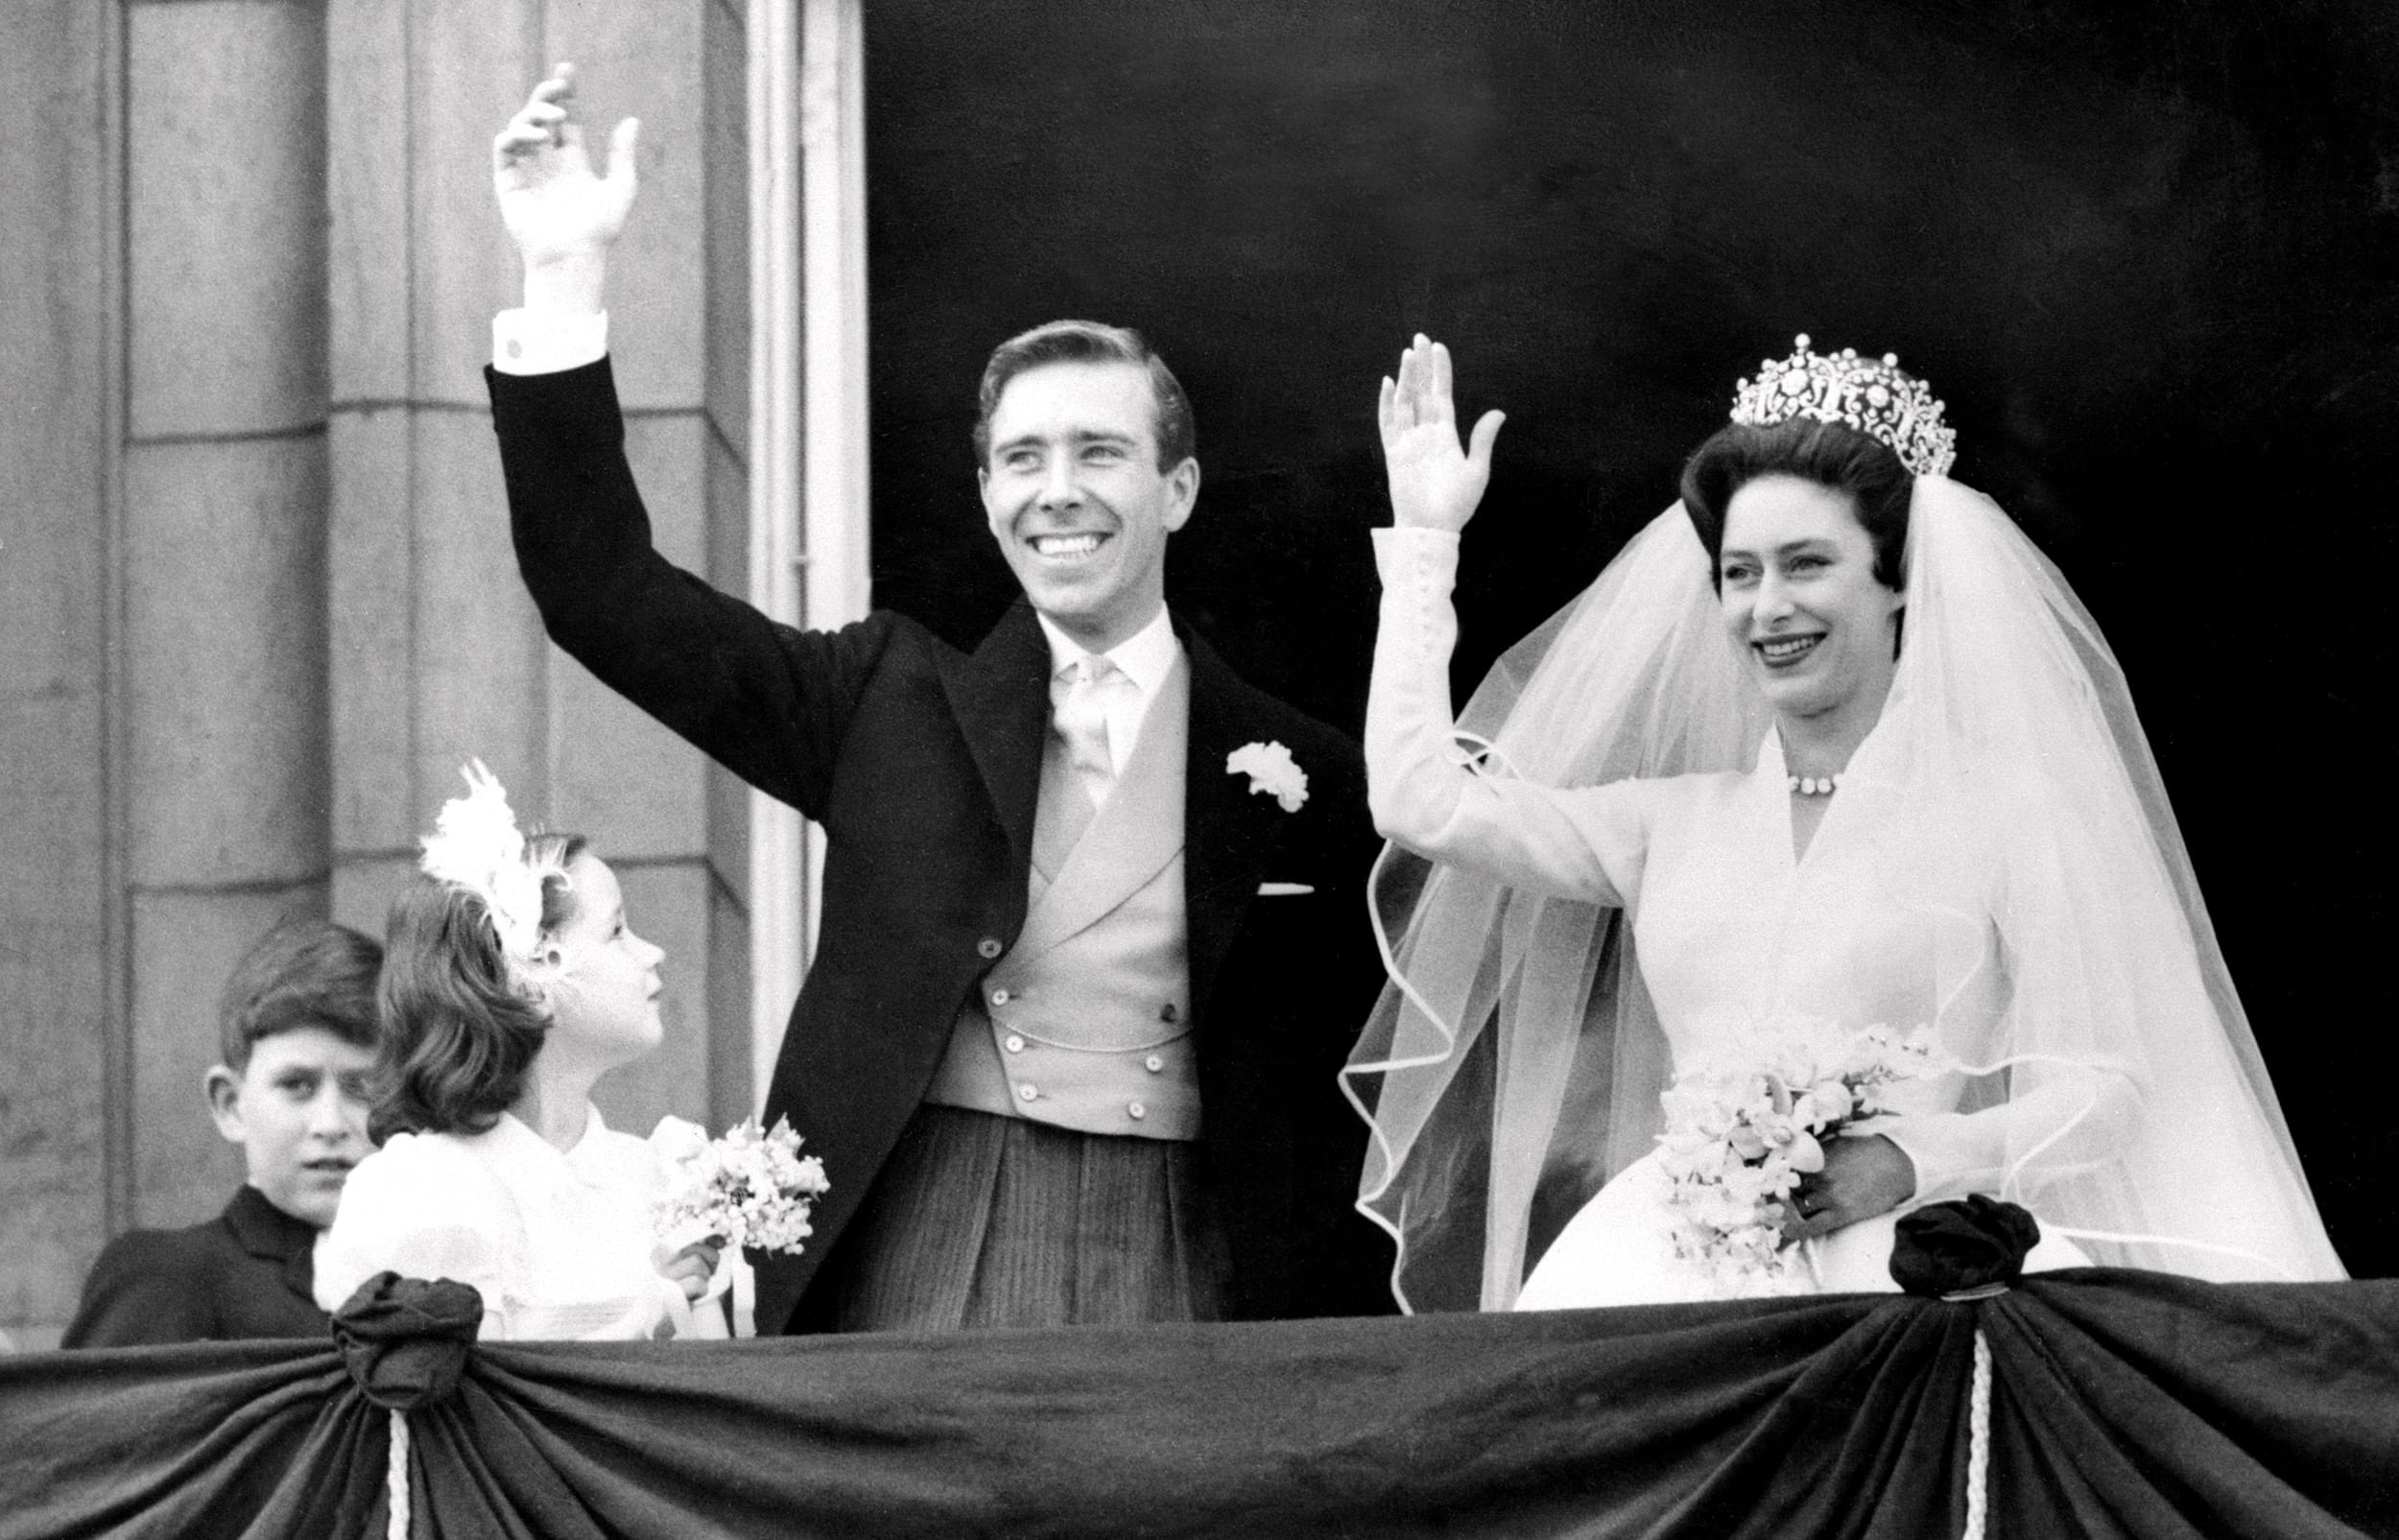 Lord Snowdon and Princess Margaret on their wedding day in 1960. The couple divorced 18 years later.